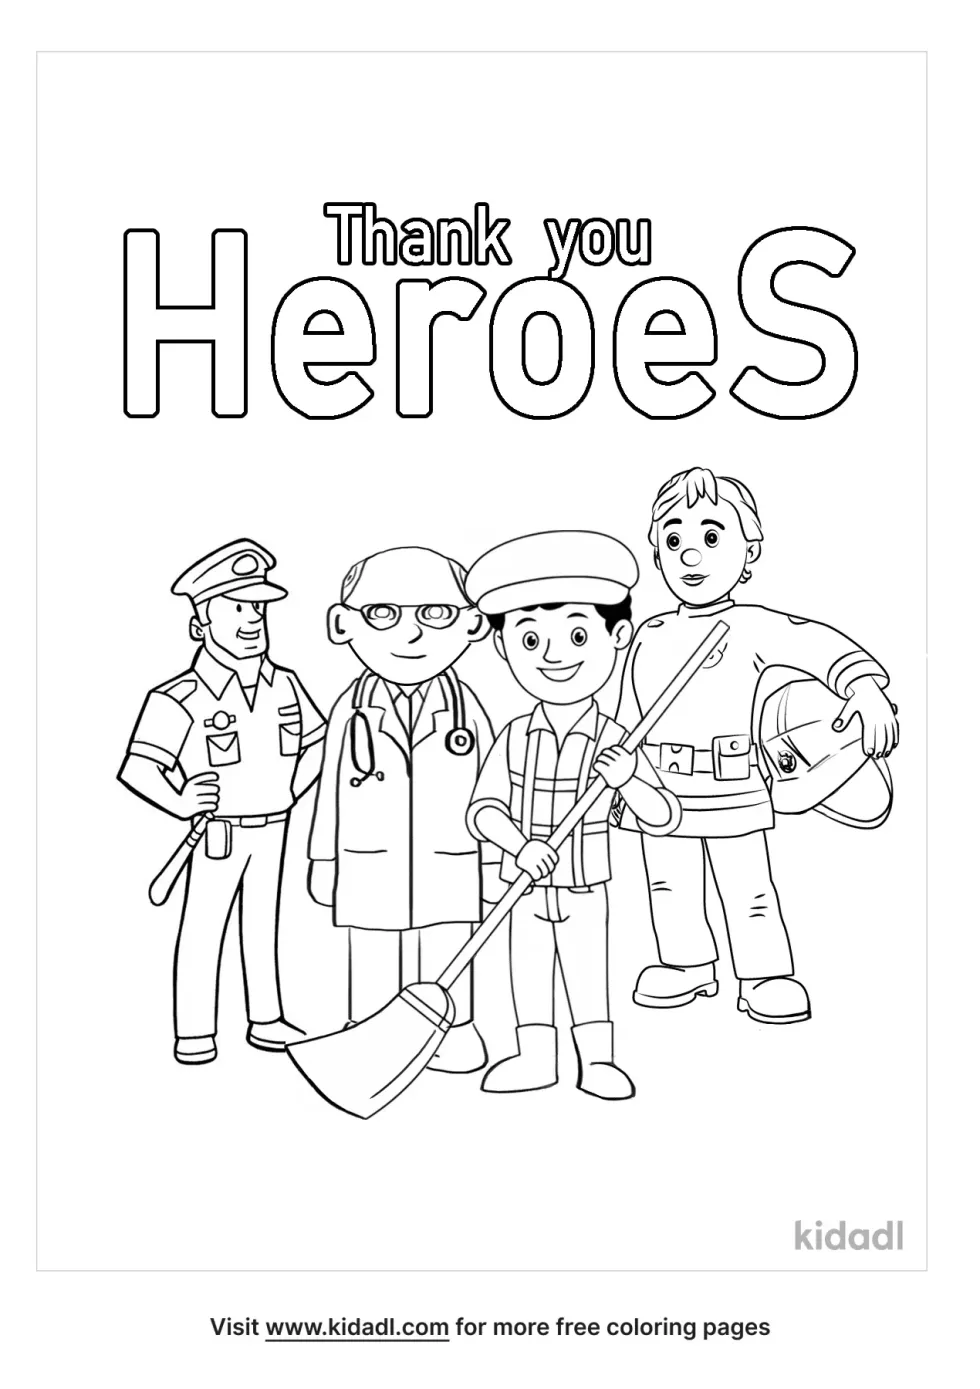 Thank You Heroes